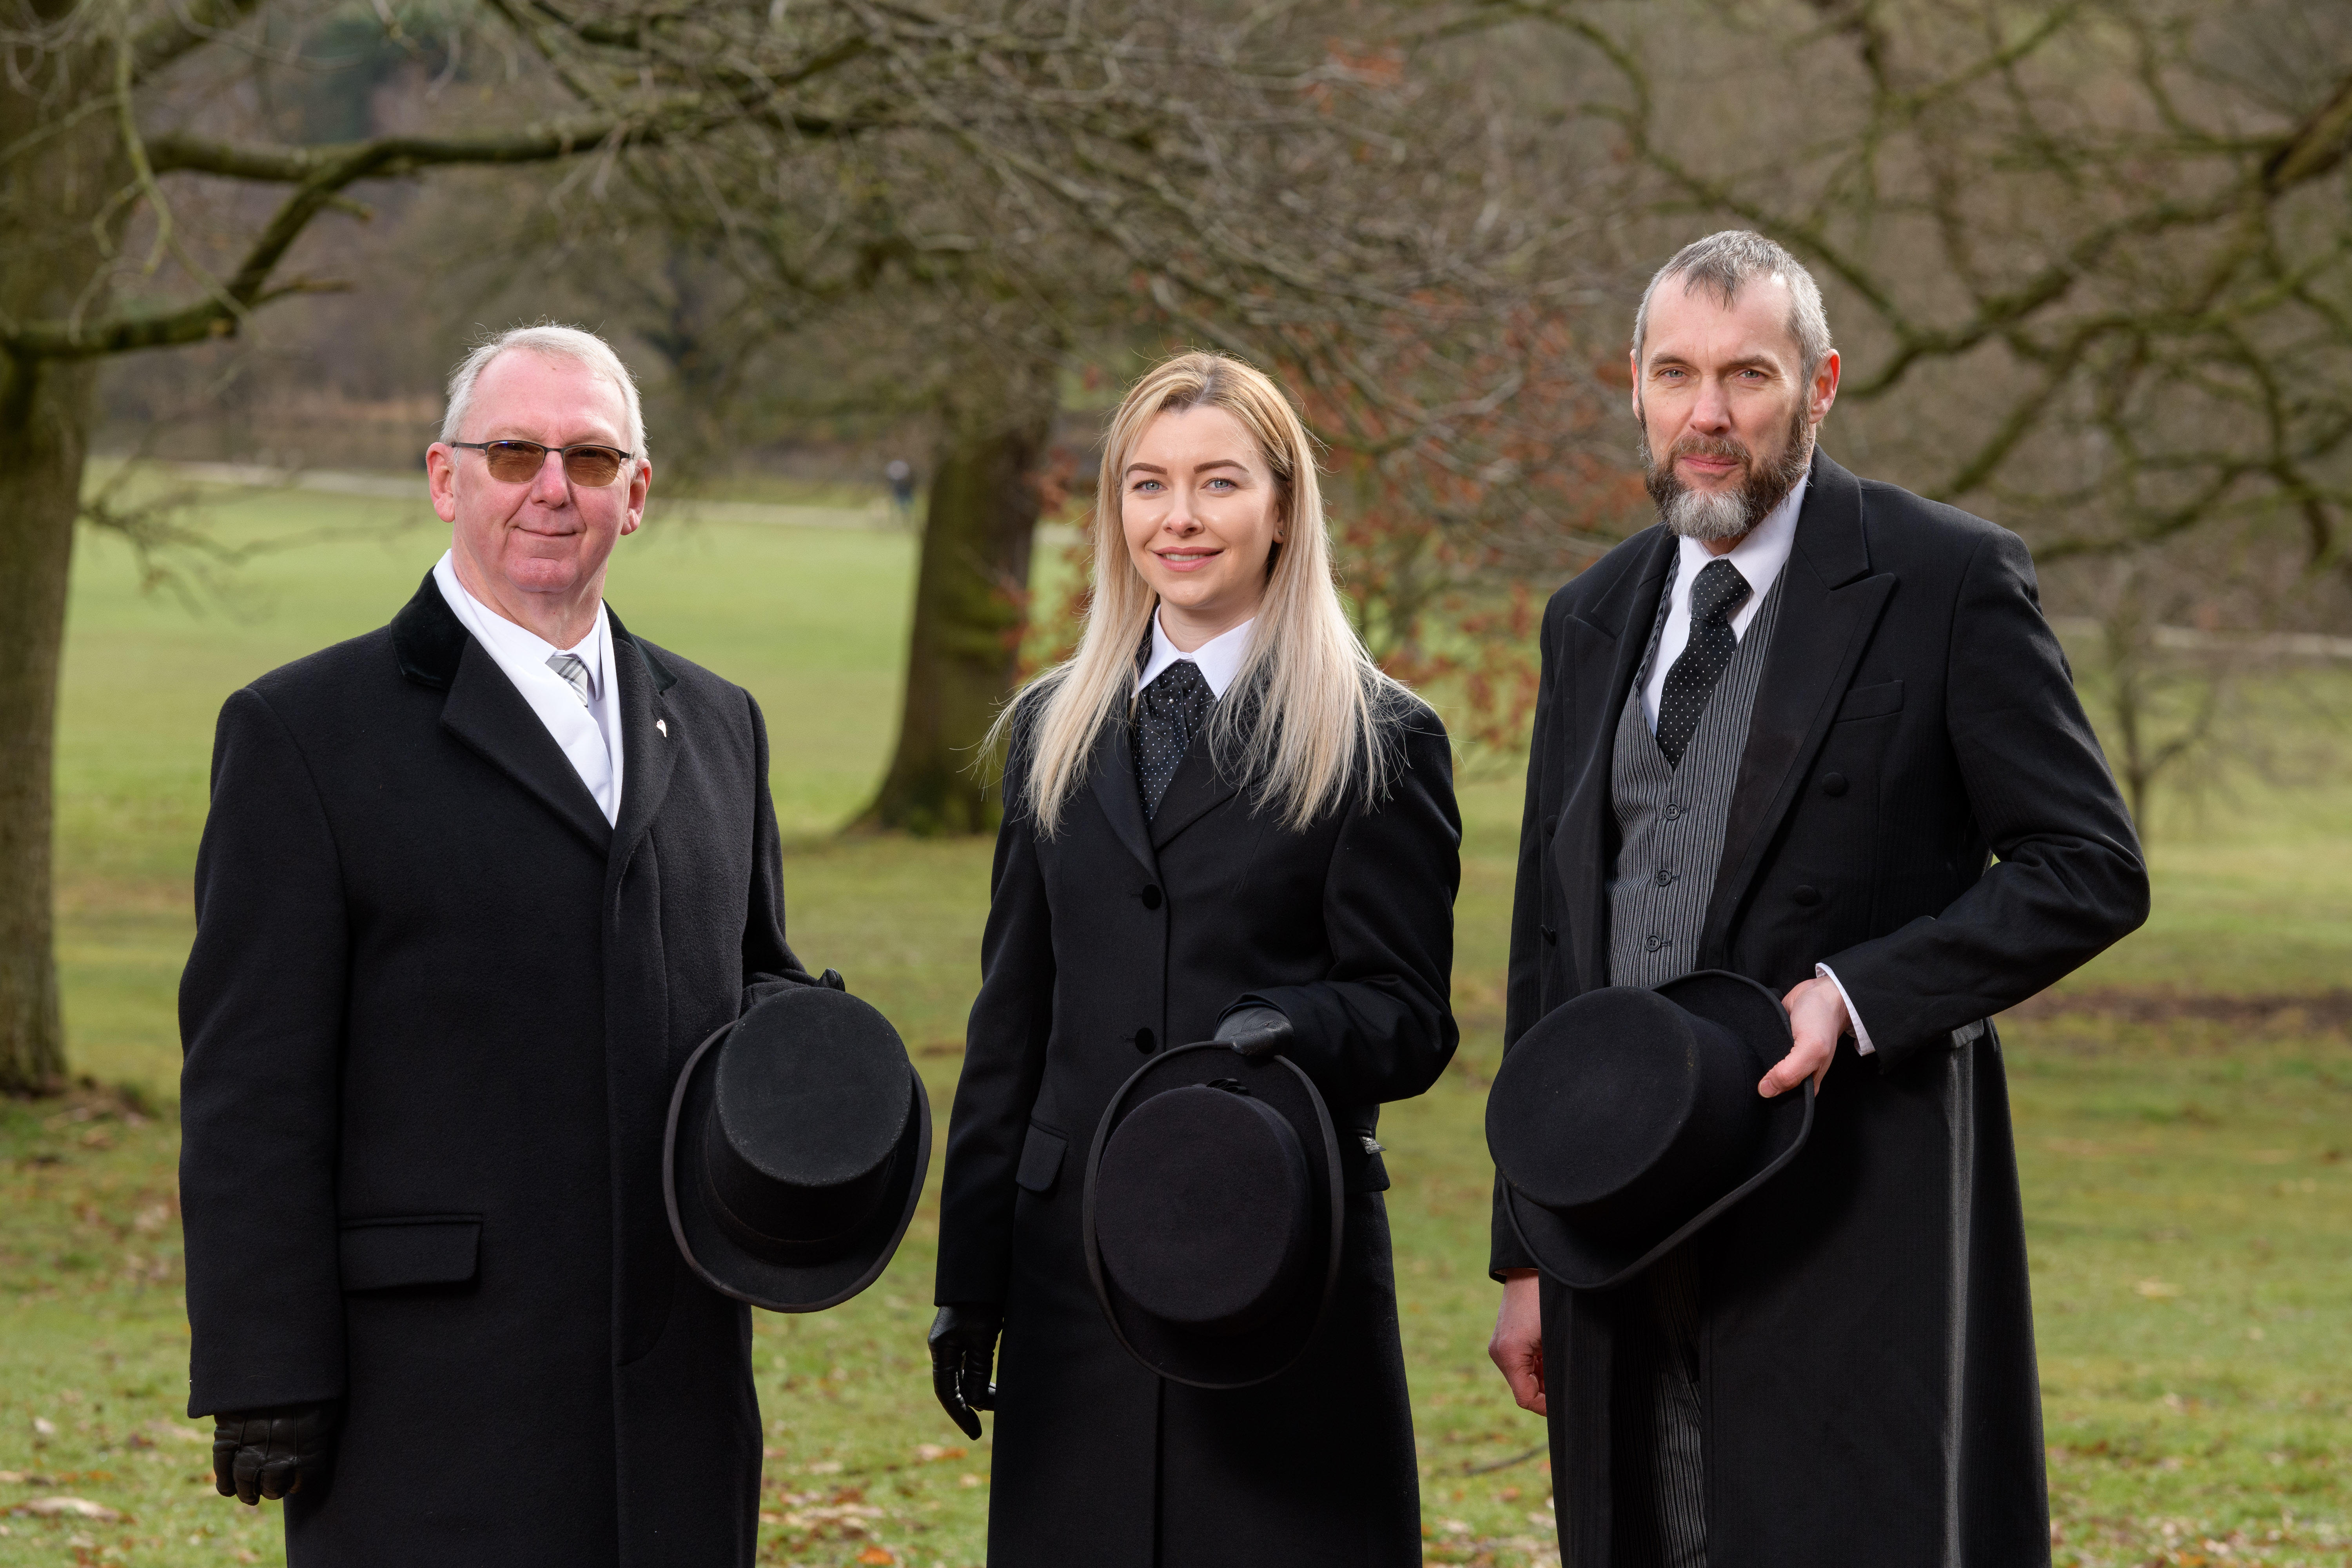 Images Newsome's Funeral Directors